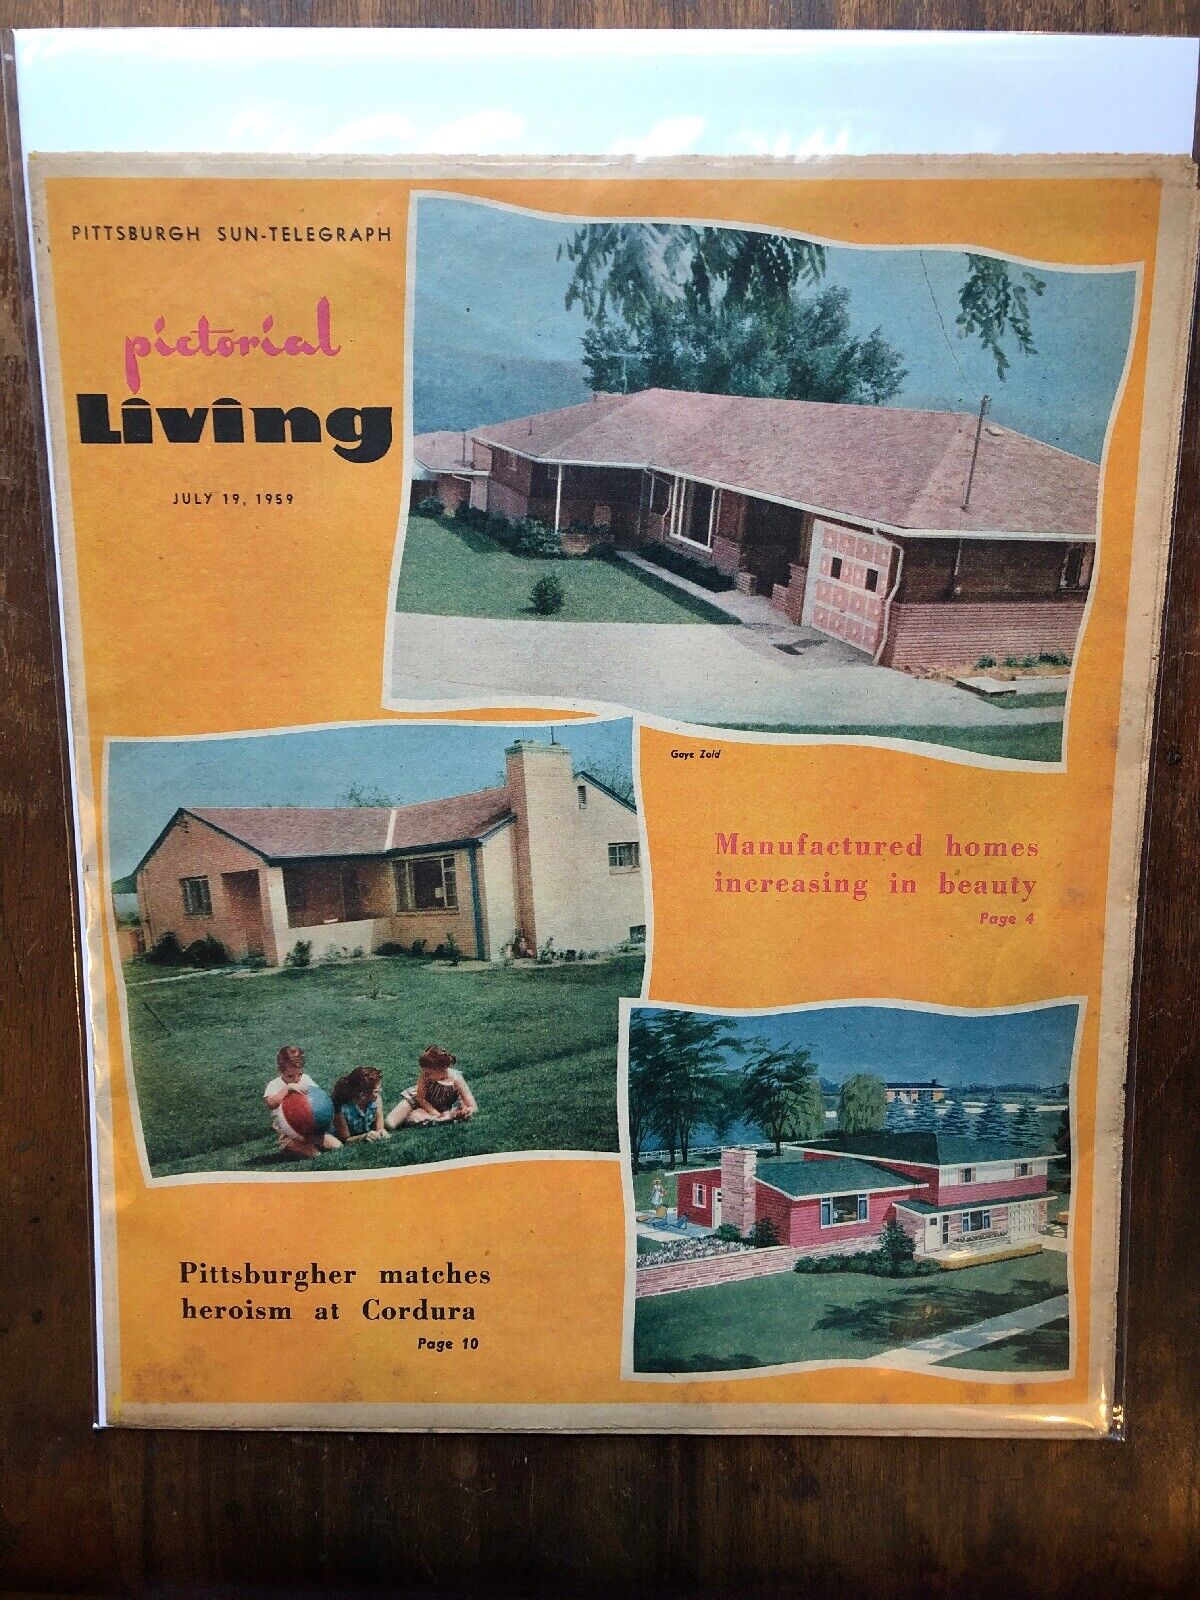 1959 July 19 PICTORIAL LIVING Newspaper Insert (Pittsburgh Area) (MH154)